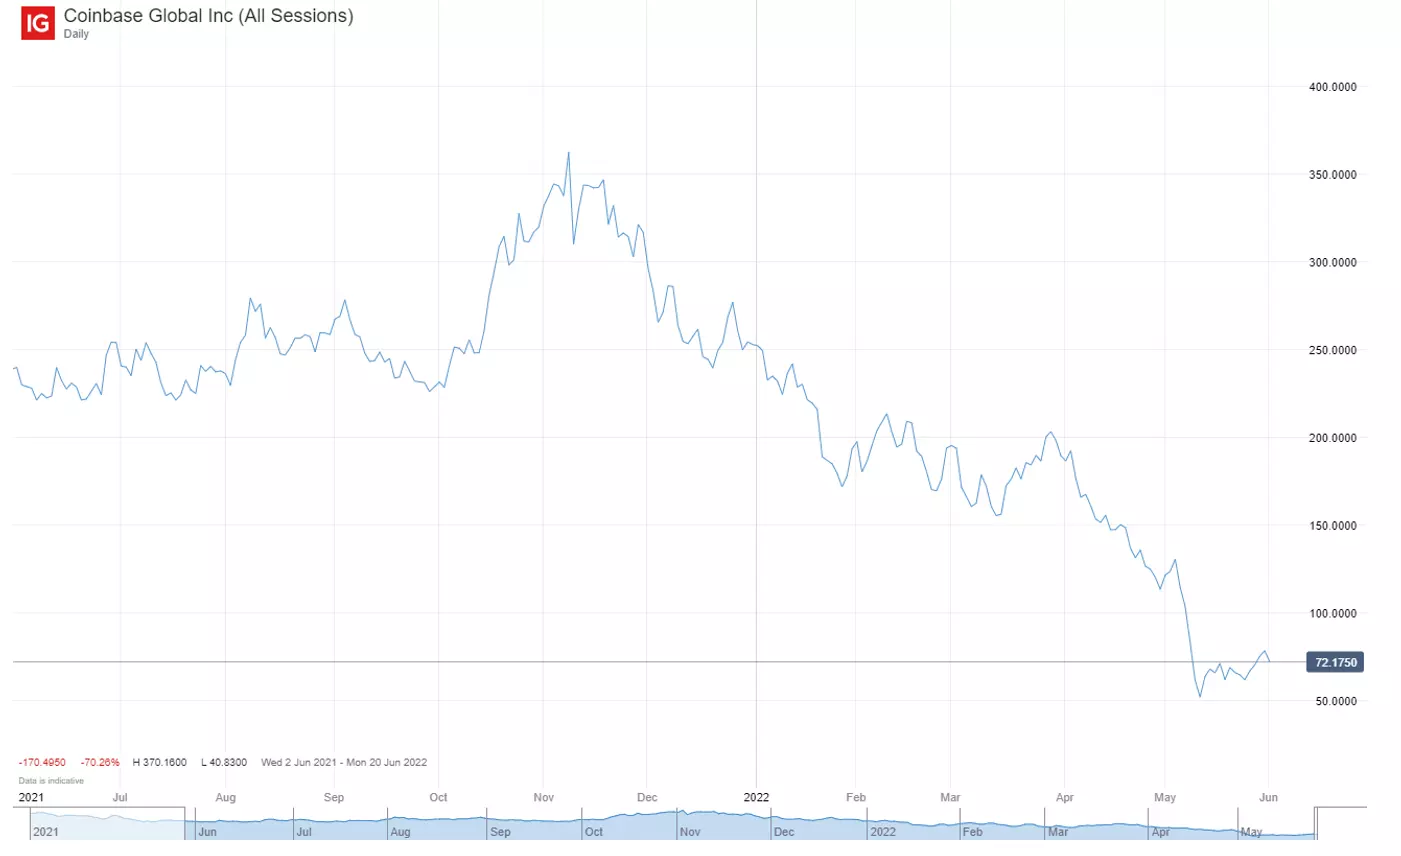 Price chart showing the Coinbase share price performance over a one-year period. The share price had a six month increase from 240p to a high of 370p in November 2021. This was followed by a steep 6 months decline to a 72p in June 2022.